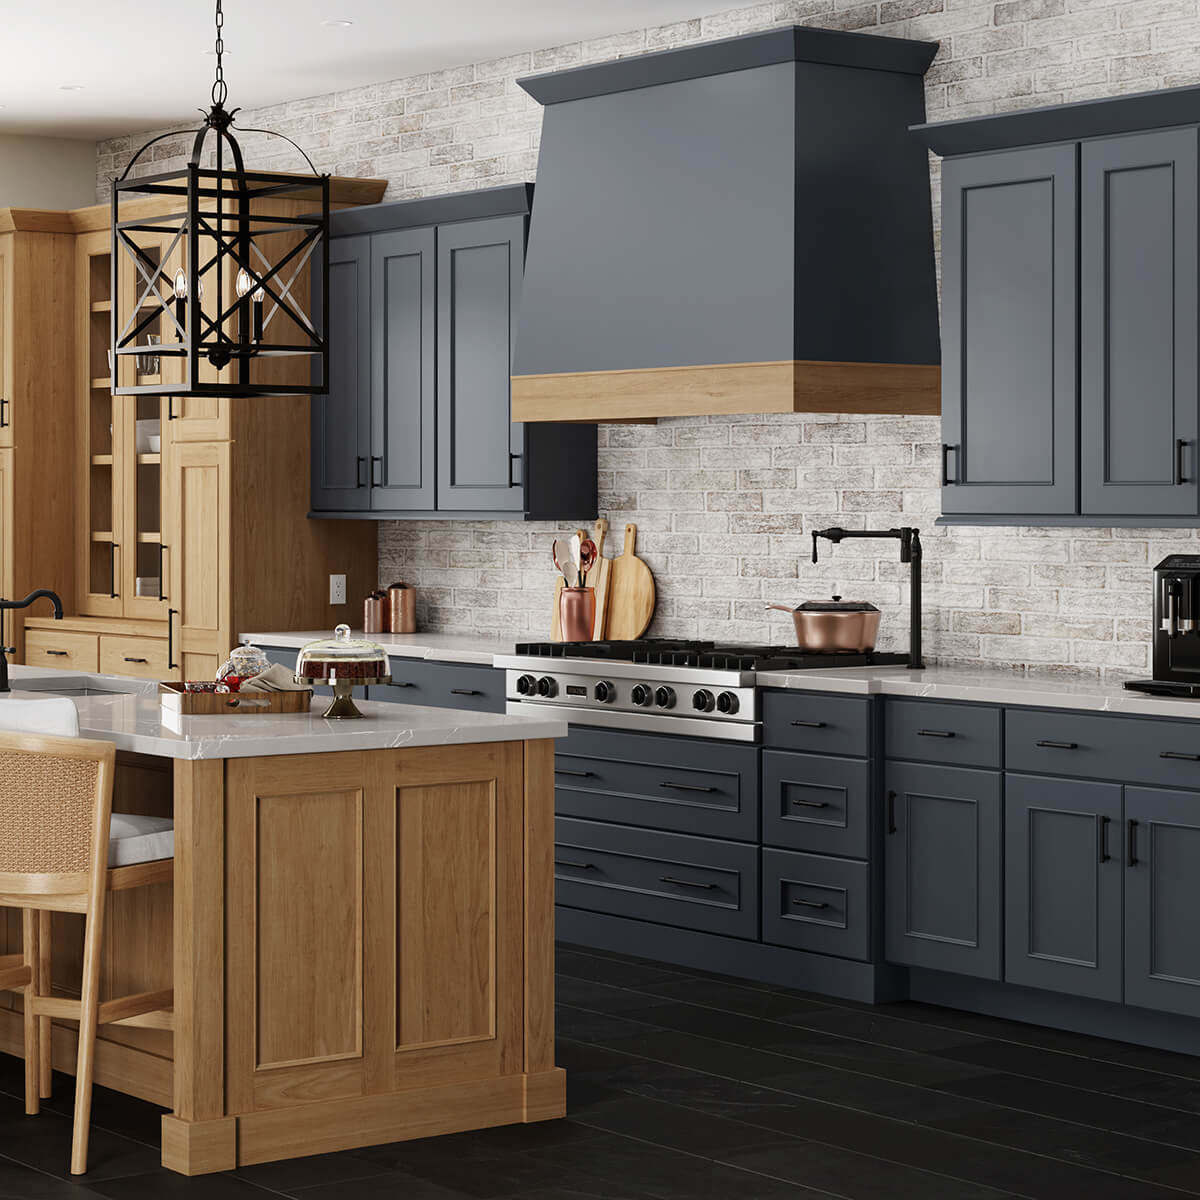 A trendy kitchen color for cabinets. This kitchen features the Cyberspace paint.